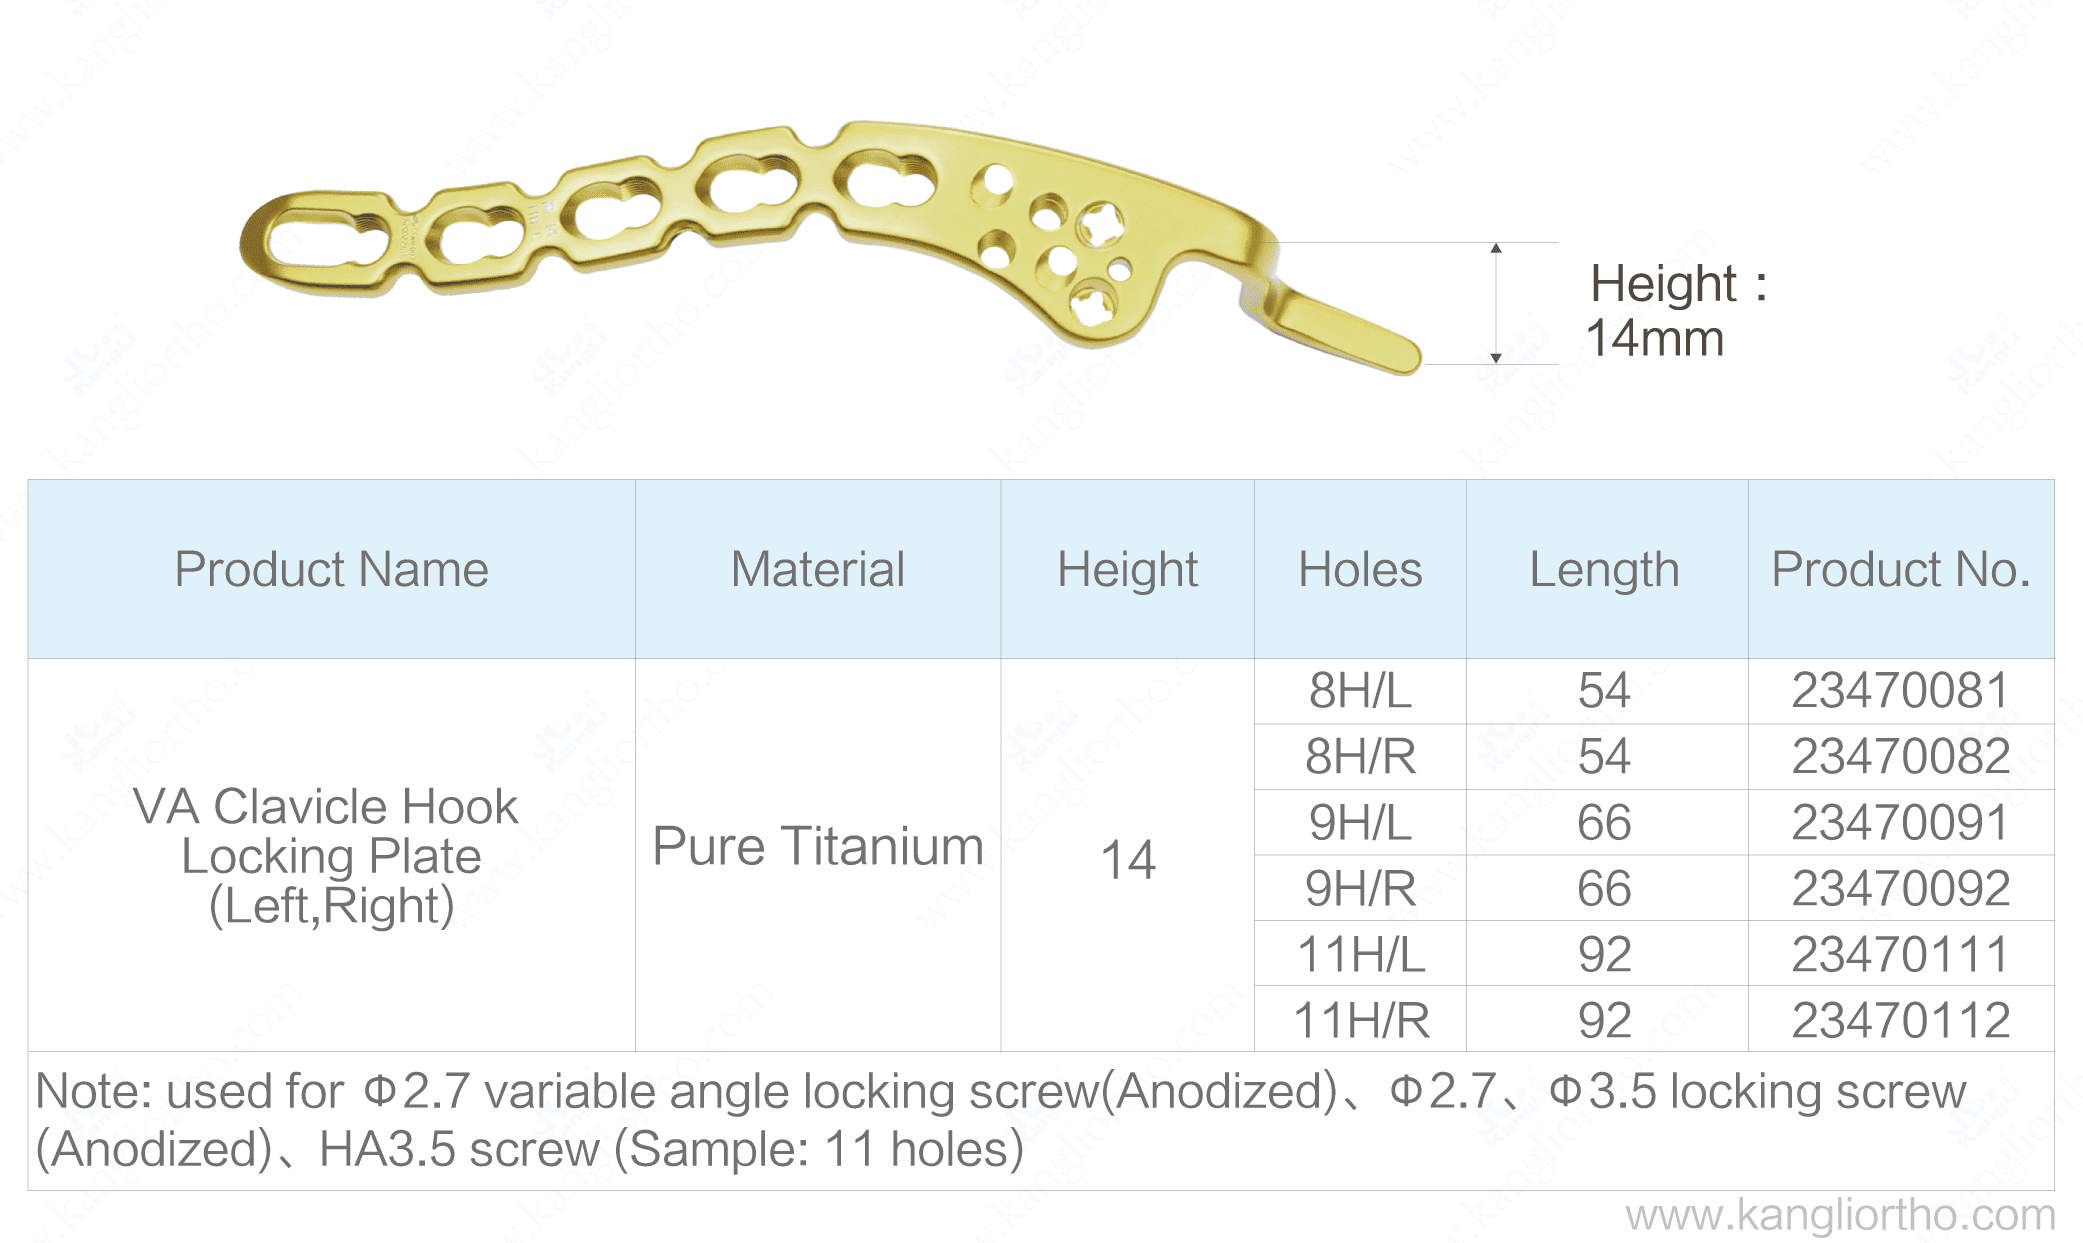 va-clavicle-hook-locking-plate-14-specifications